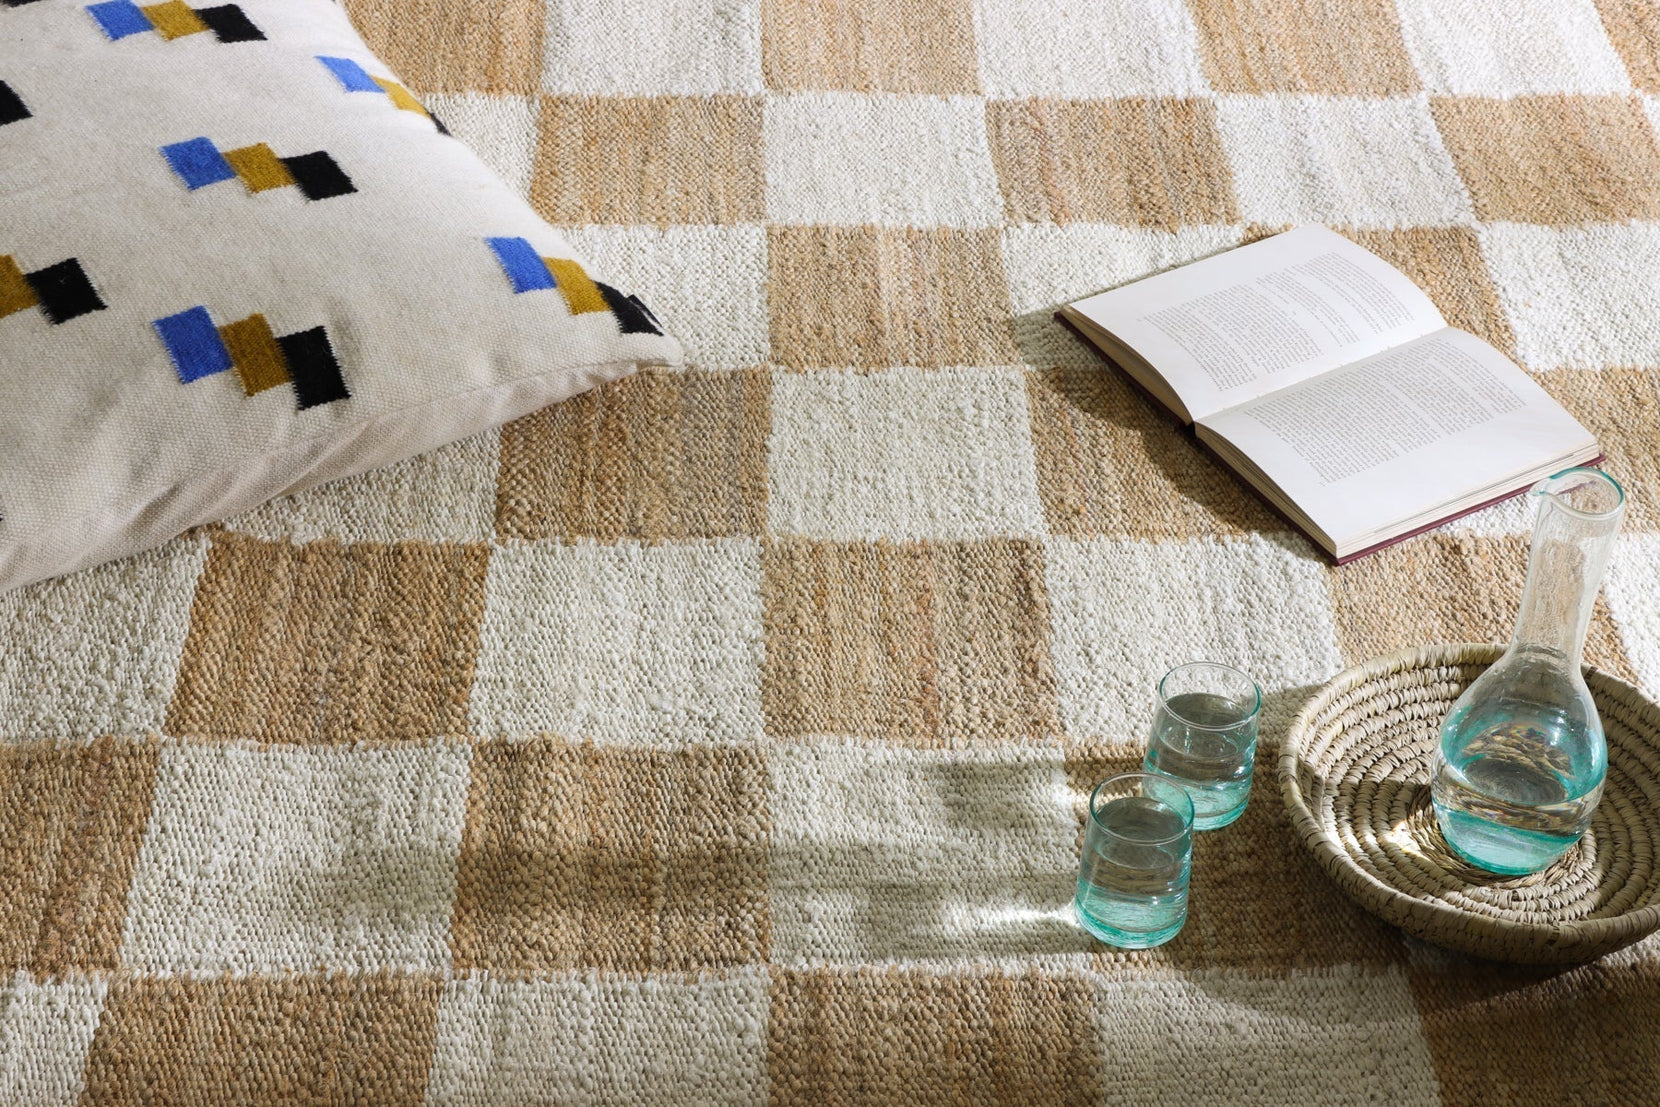 How to Take Care of a Jute Rug